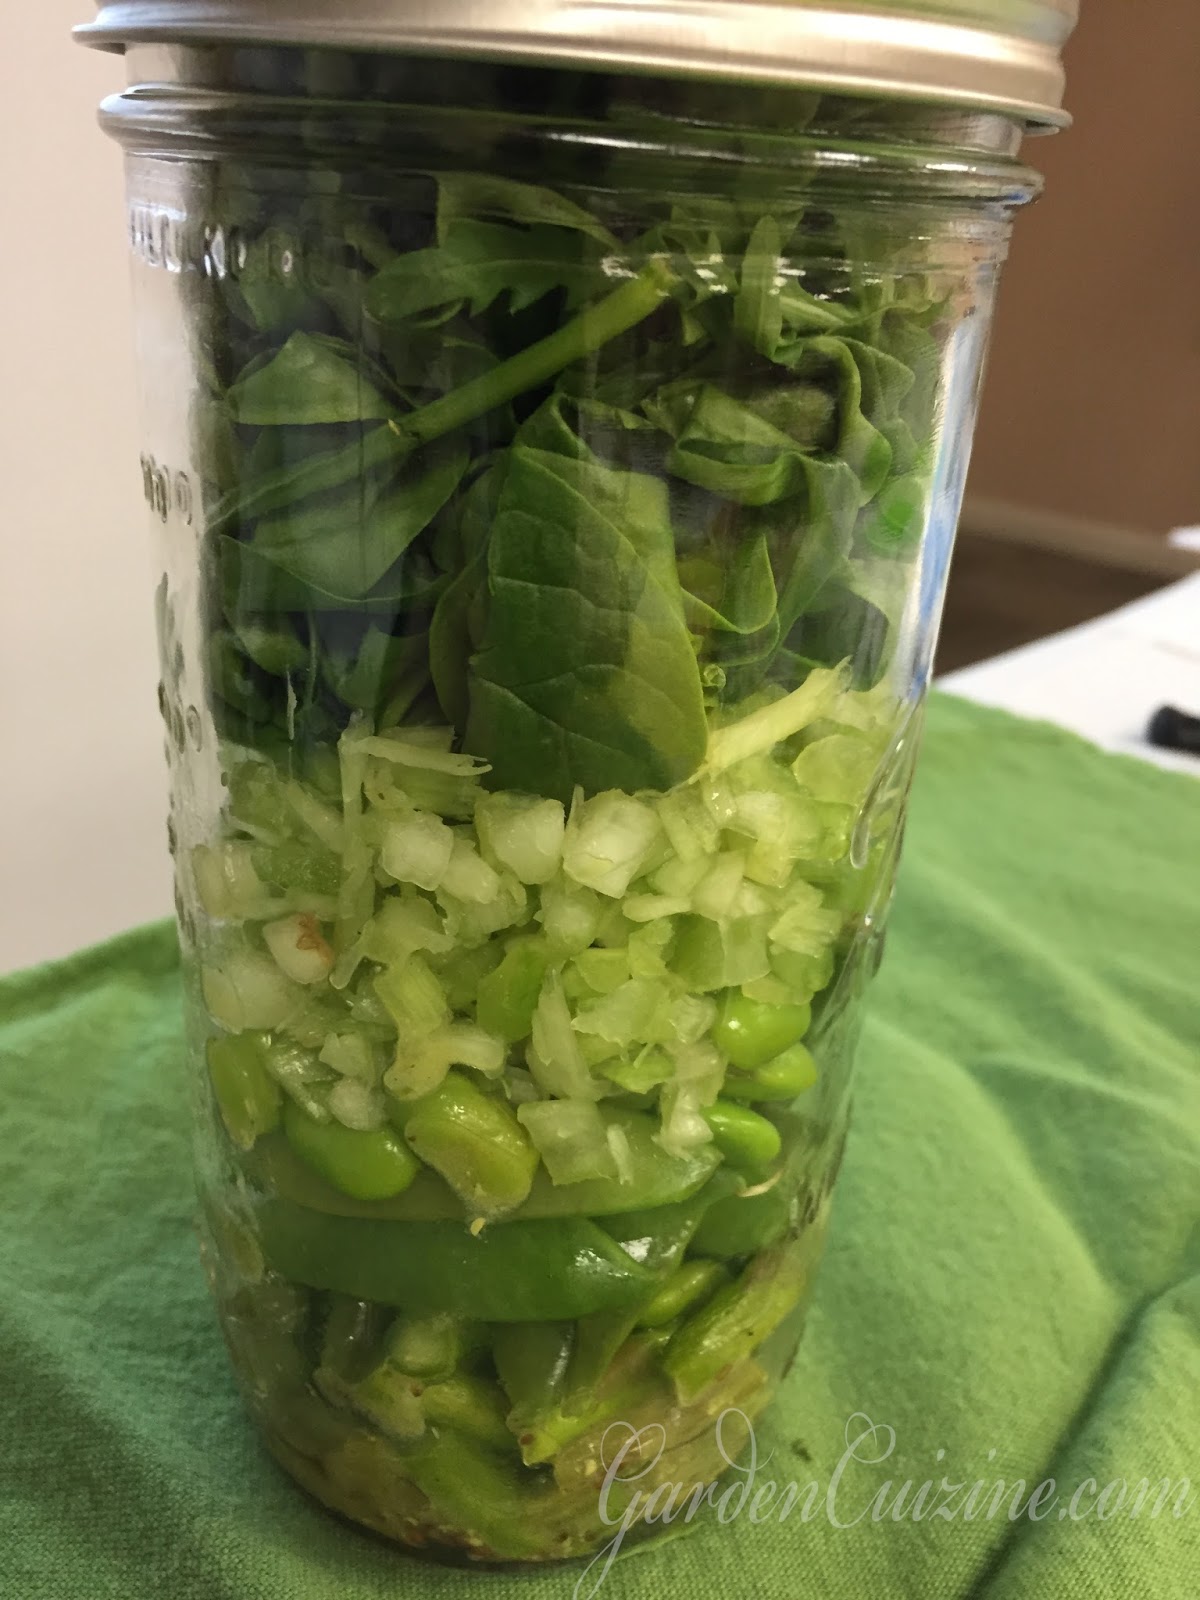 GardenCuizine: What in the world are these ginormous green